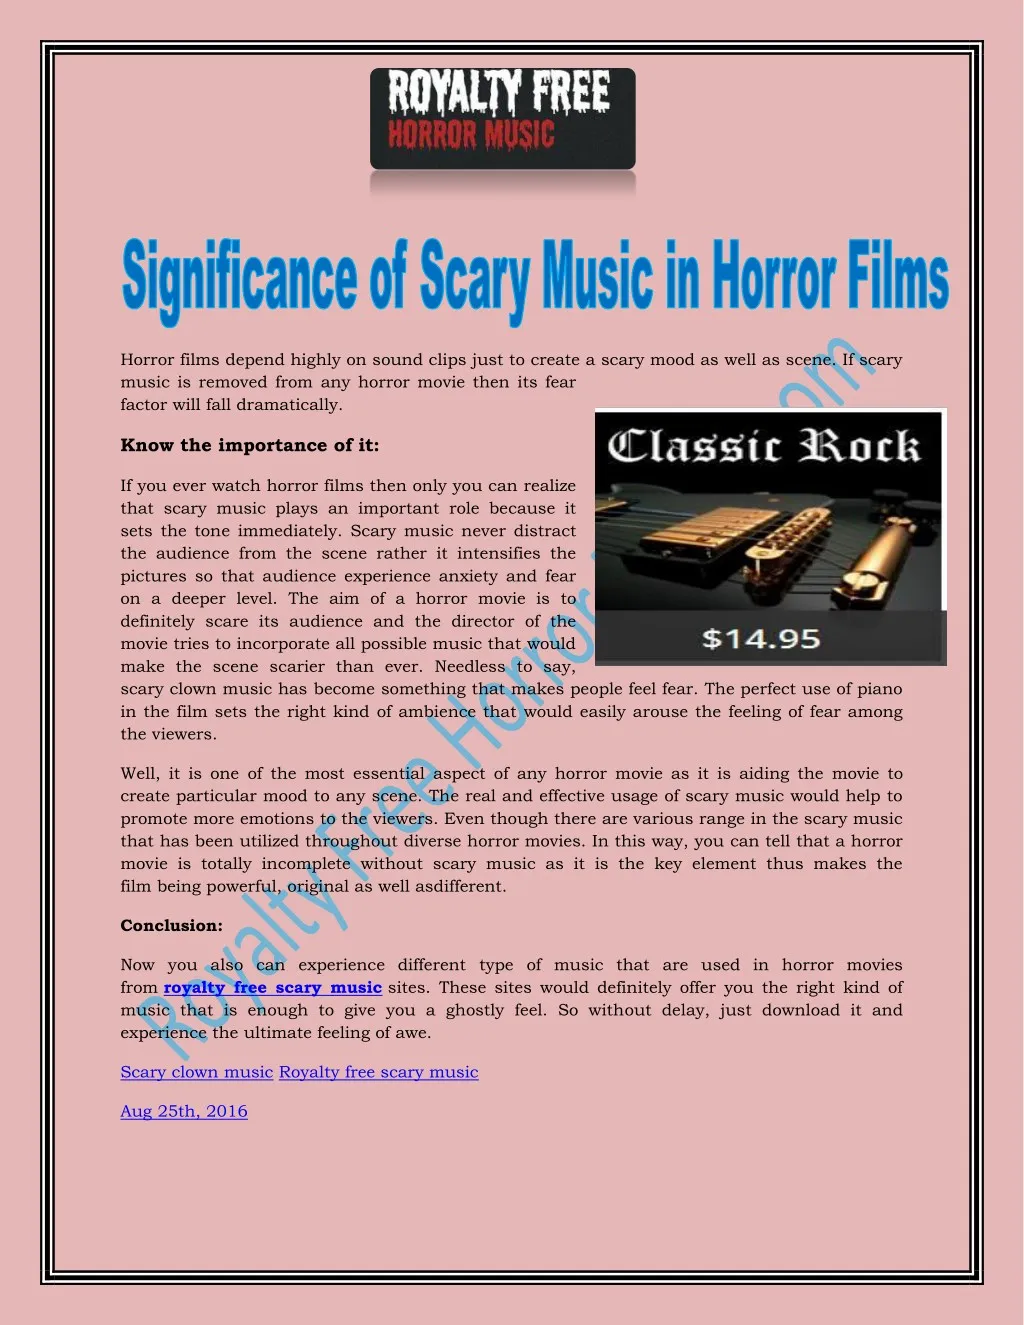 horror films depend highly on sound clips just